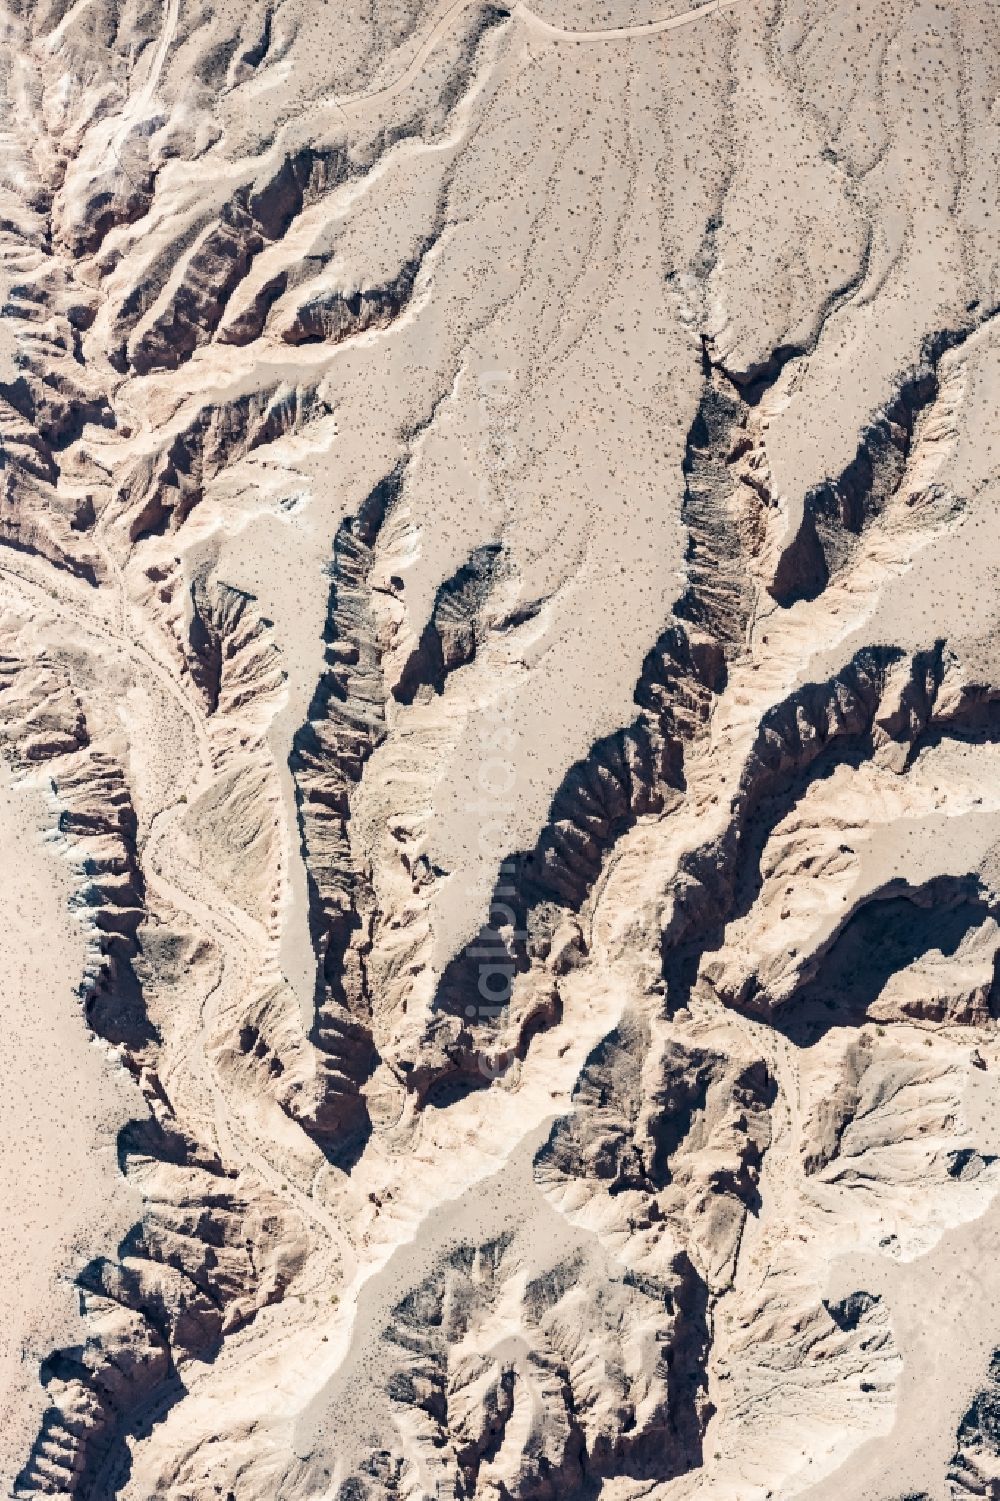 Aerial image Littlefield - Landscape of the dry desert deformed by soil erosion and traces of water in Littlefield in Arizona, United States of America